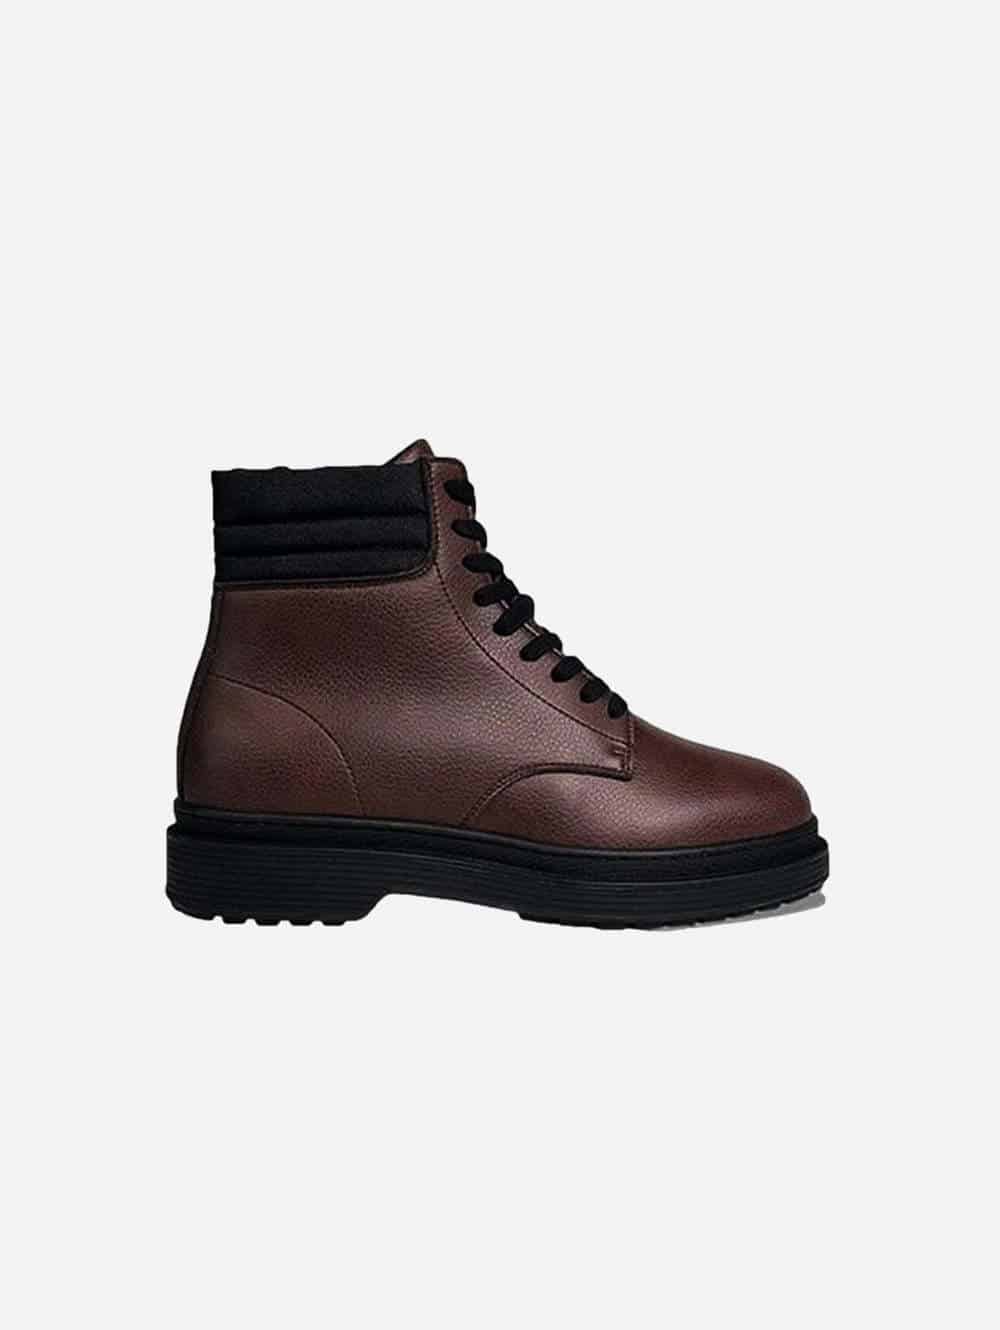 Brown lace up vegan leather mens boots